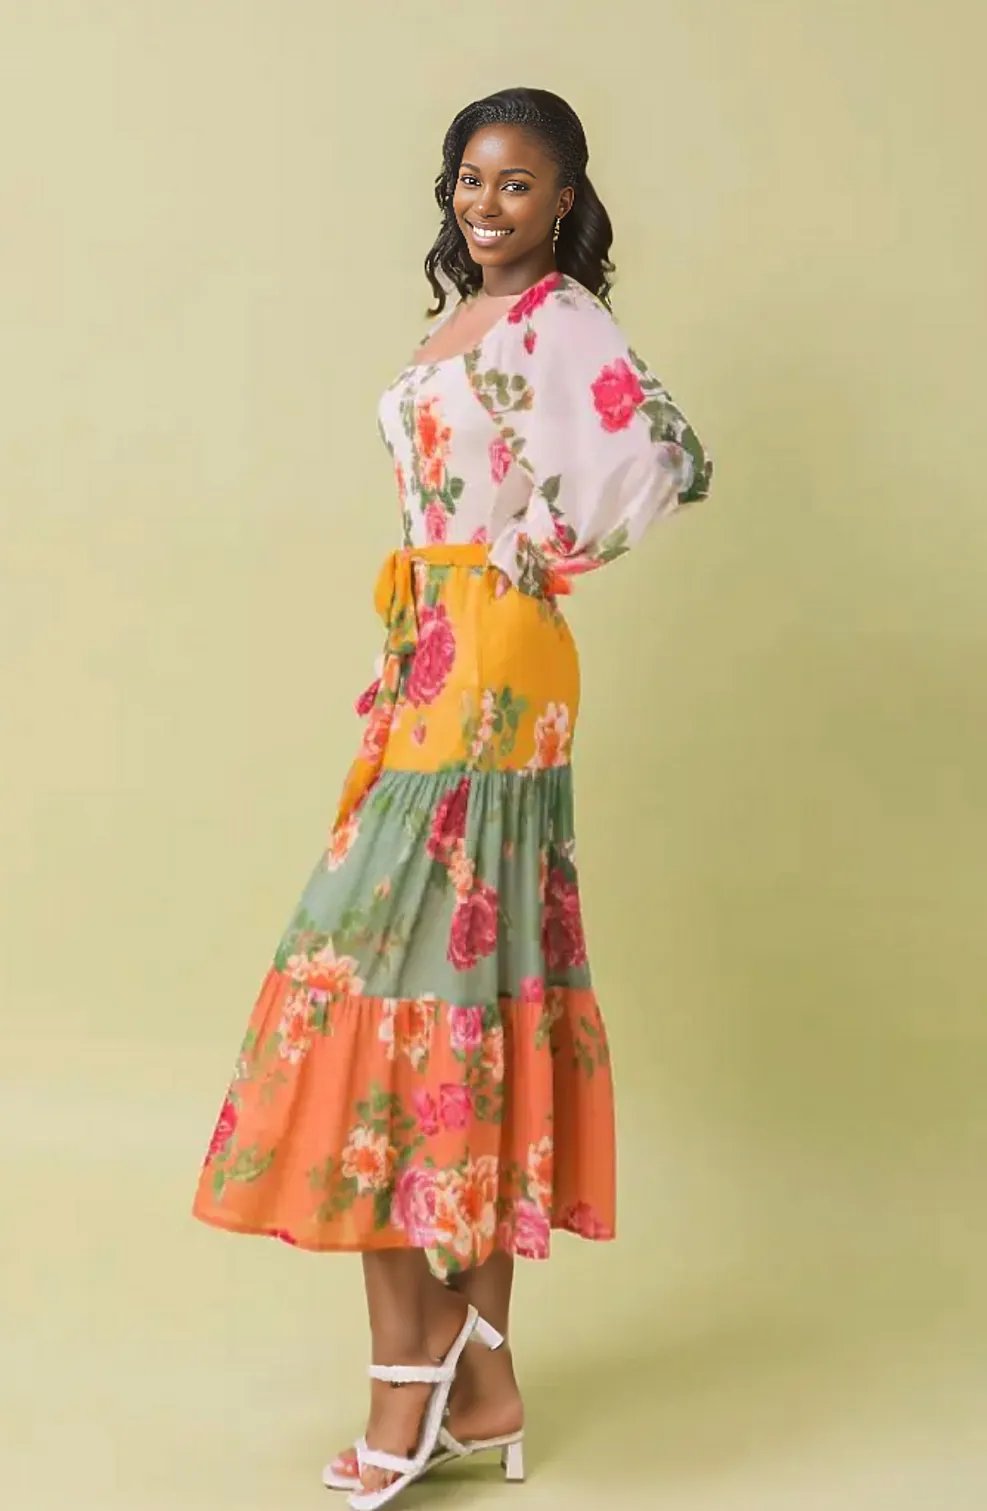 Floral Printed Woven Long Dress, Sizes Small - Large